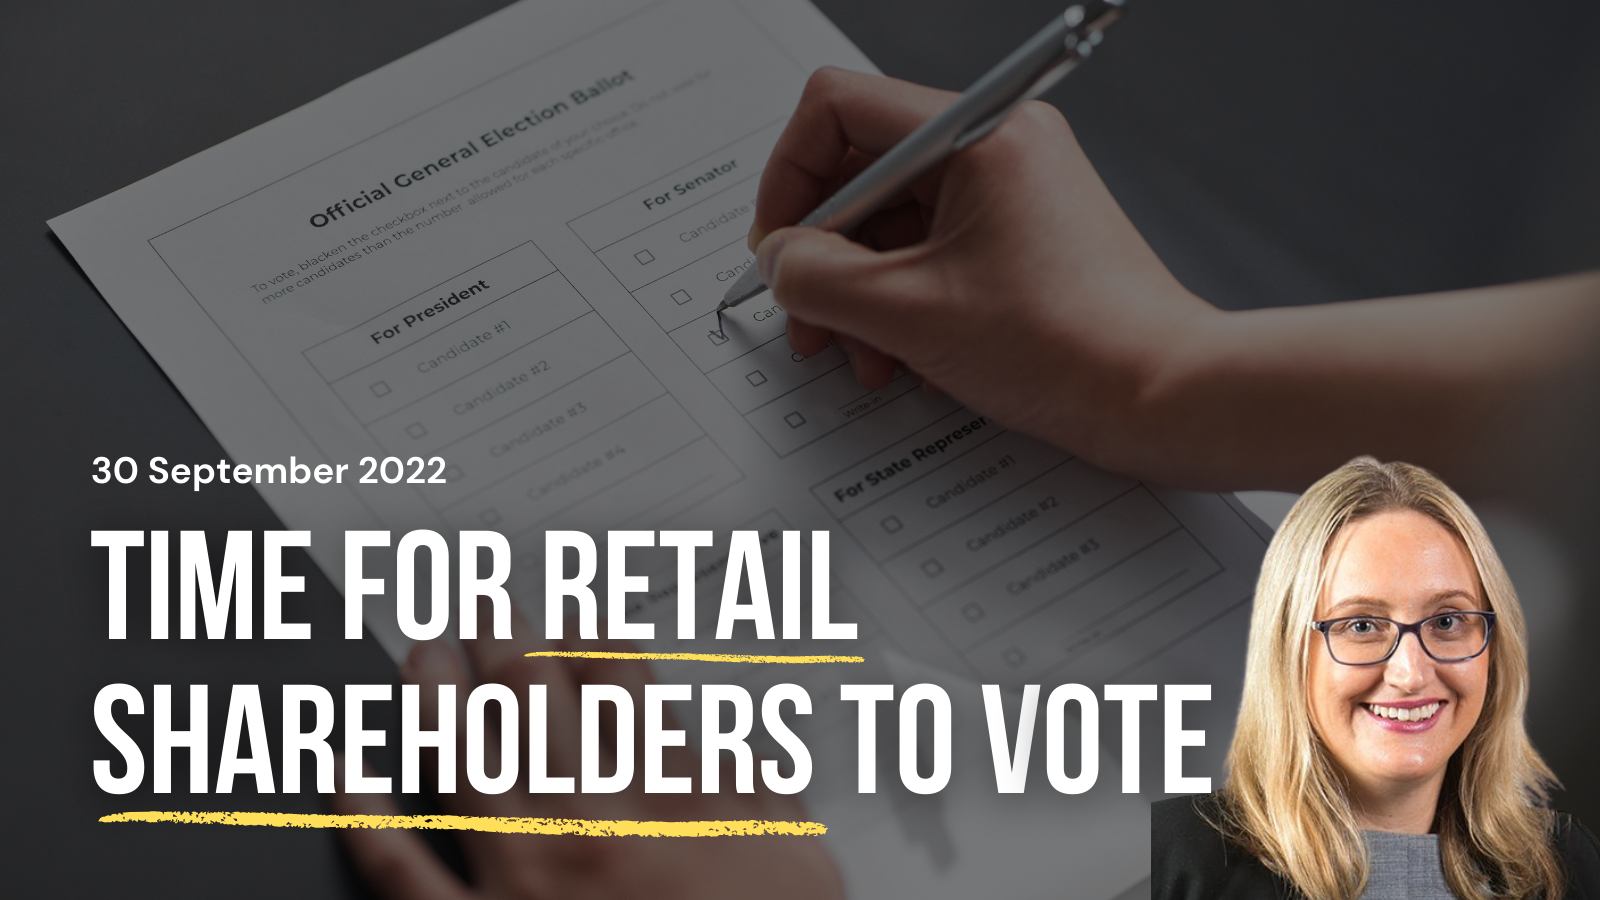 50. time for retail shareholders to vote